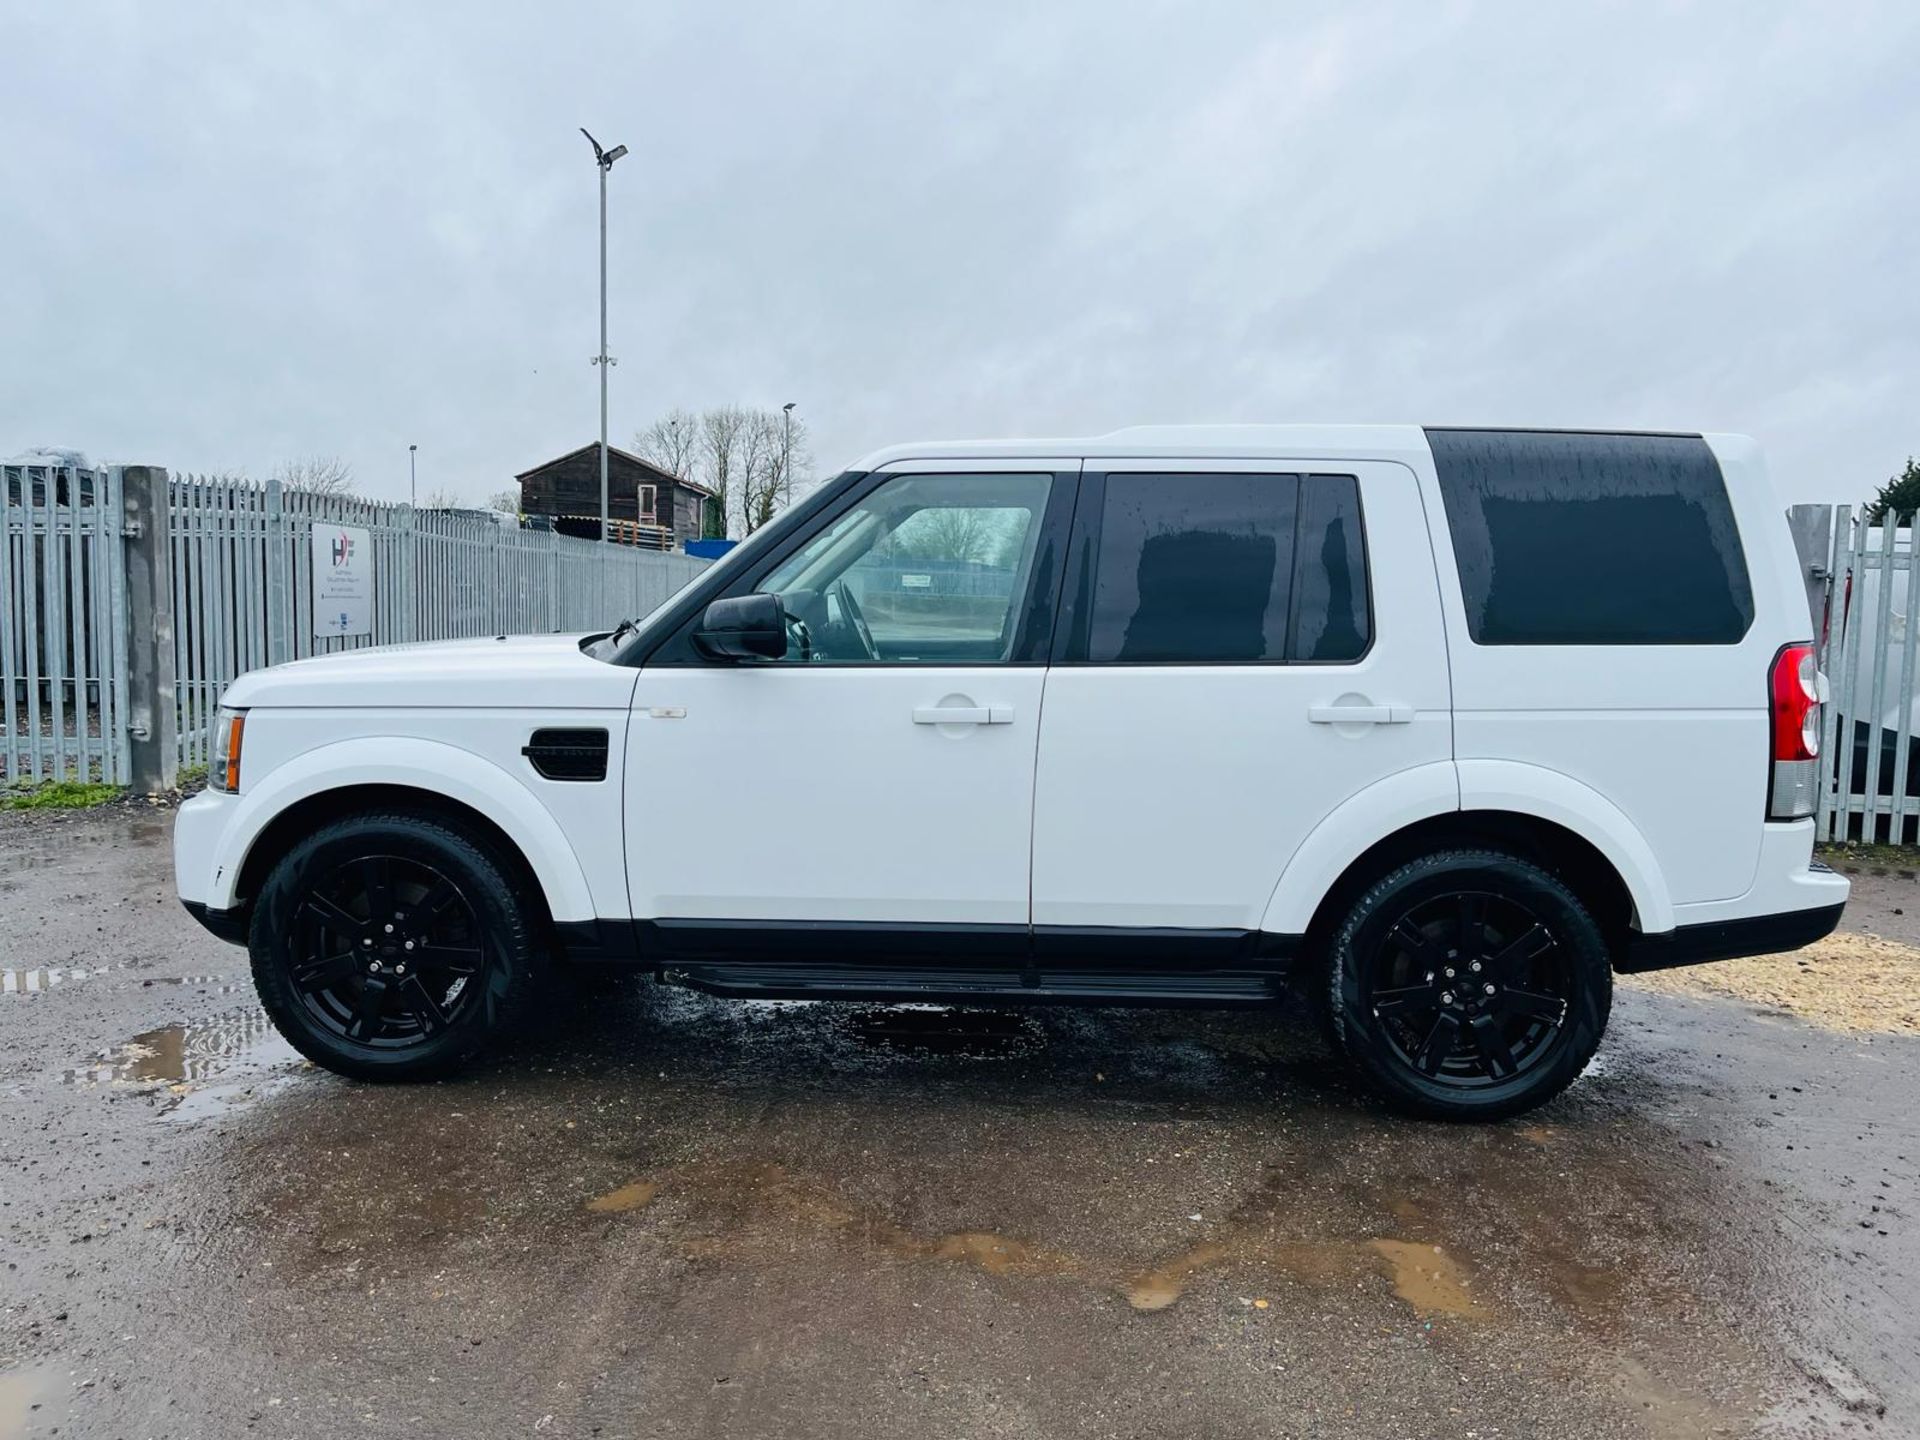 ** ON SALE ** Land Rover Discovery 4 255 SDV6 3.0 2012 '62 Reg' - Alloy Wheels - A/C - Tow Bar - Image 4 of 32